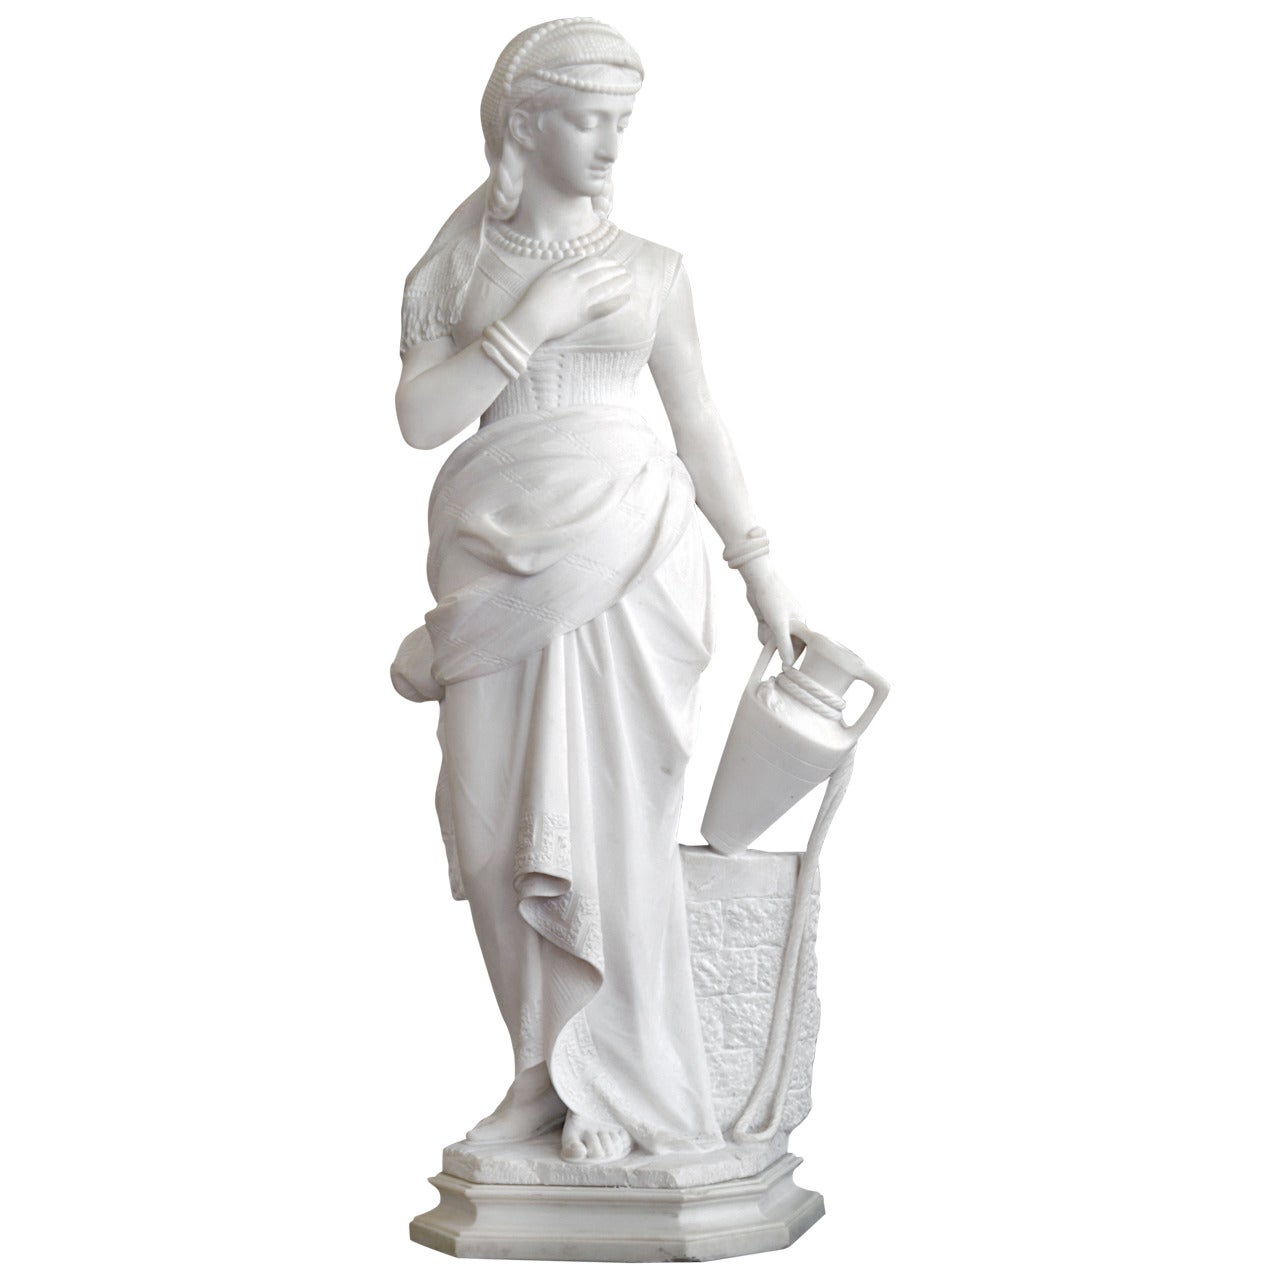 An Antique Italian Carrera Marble Sculpture by the well" by F.Vichi